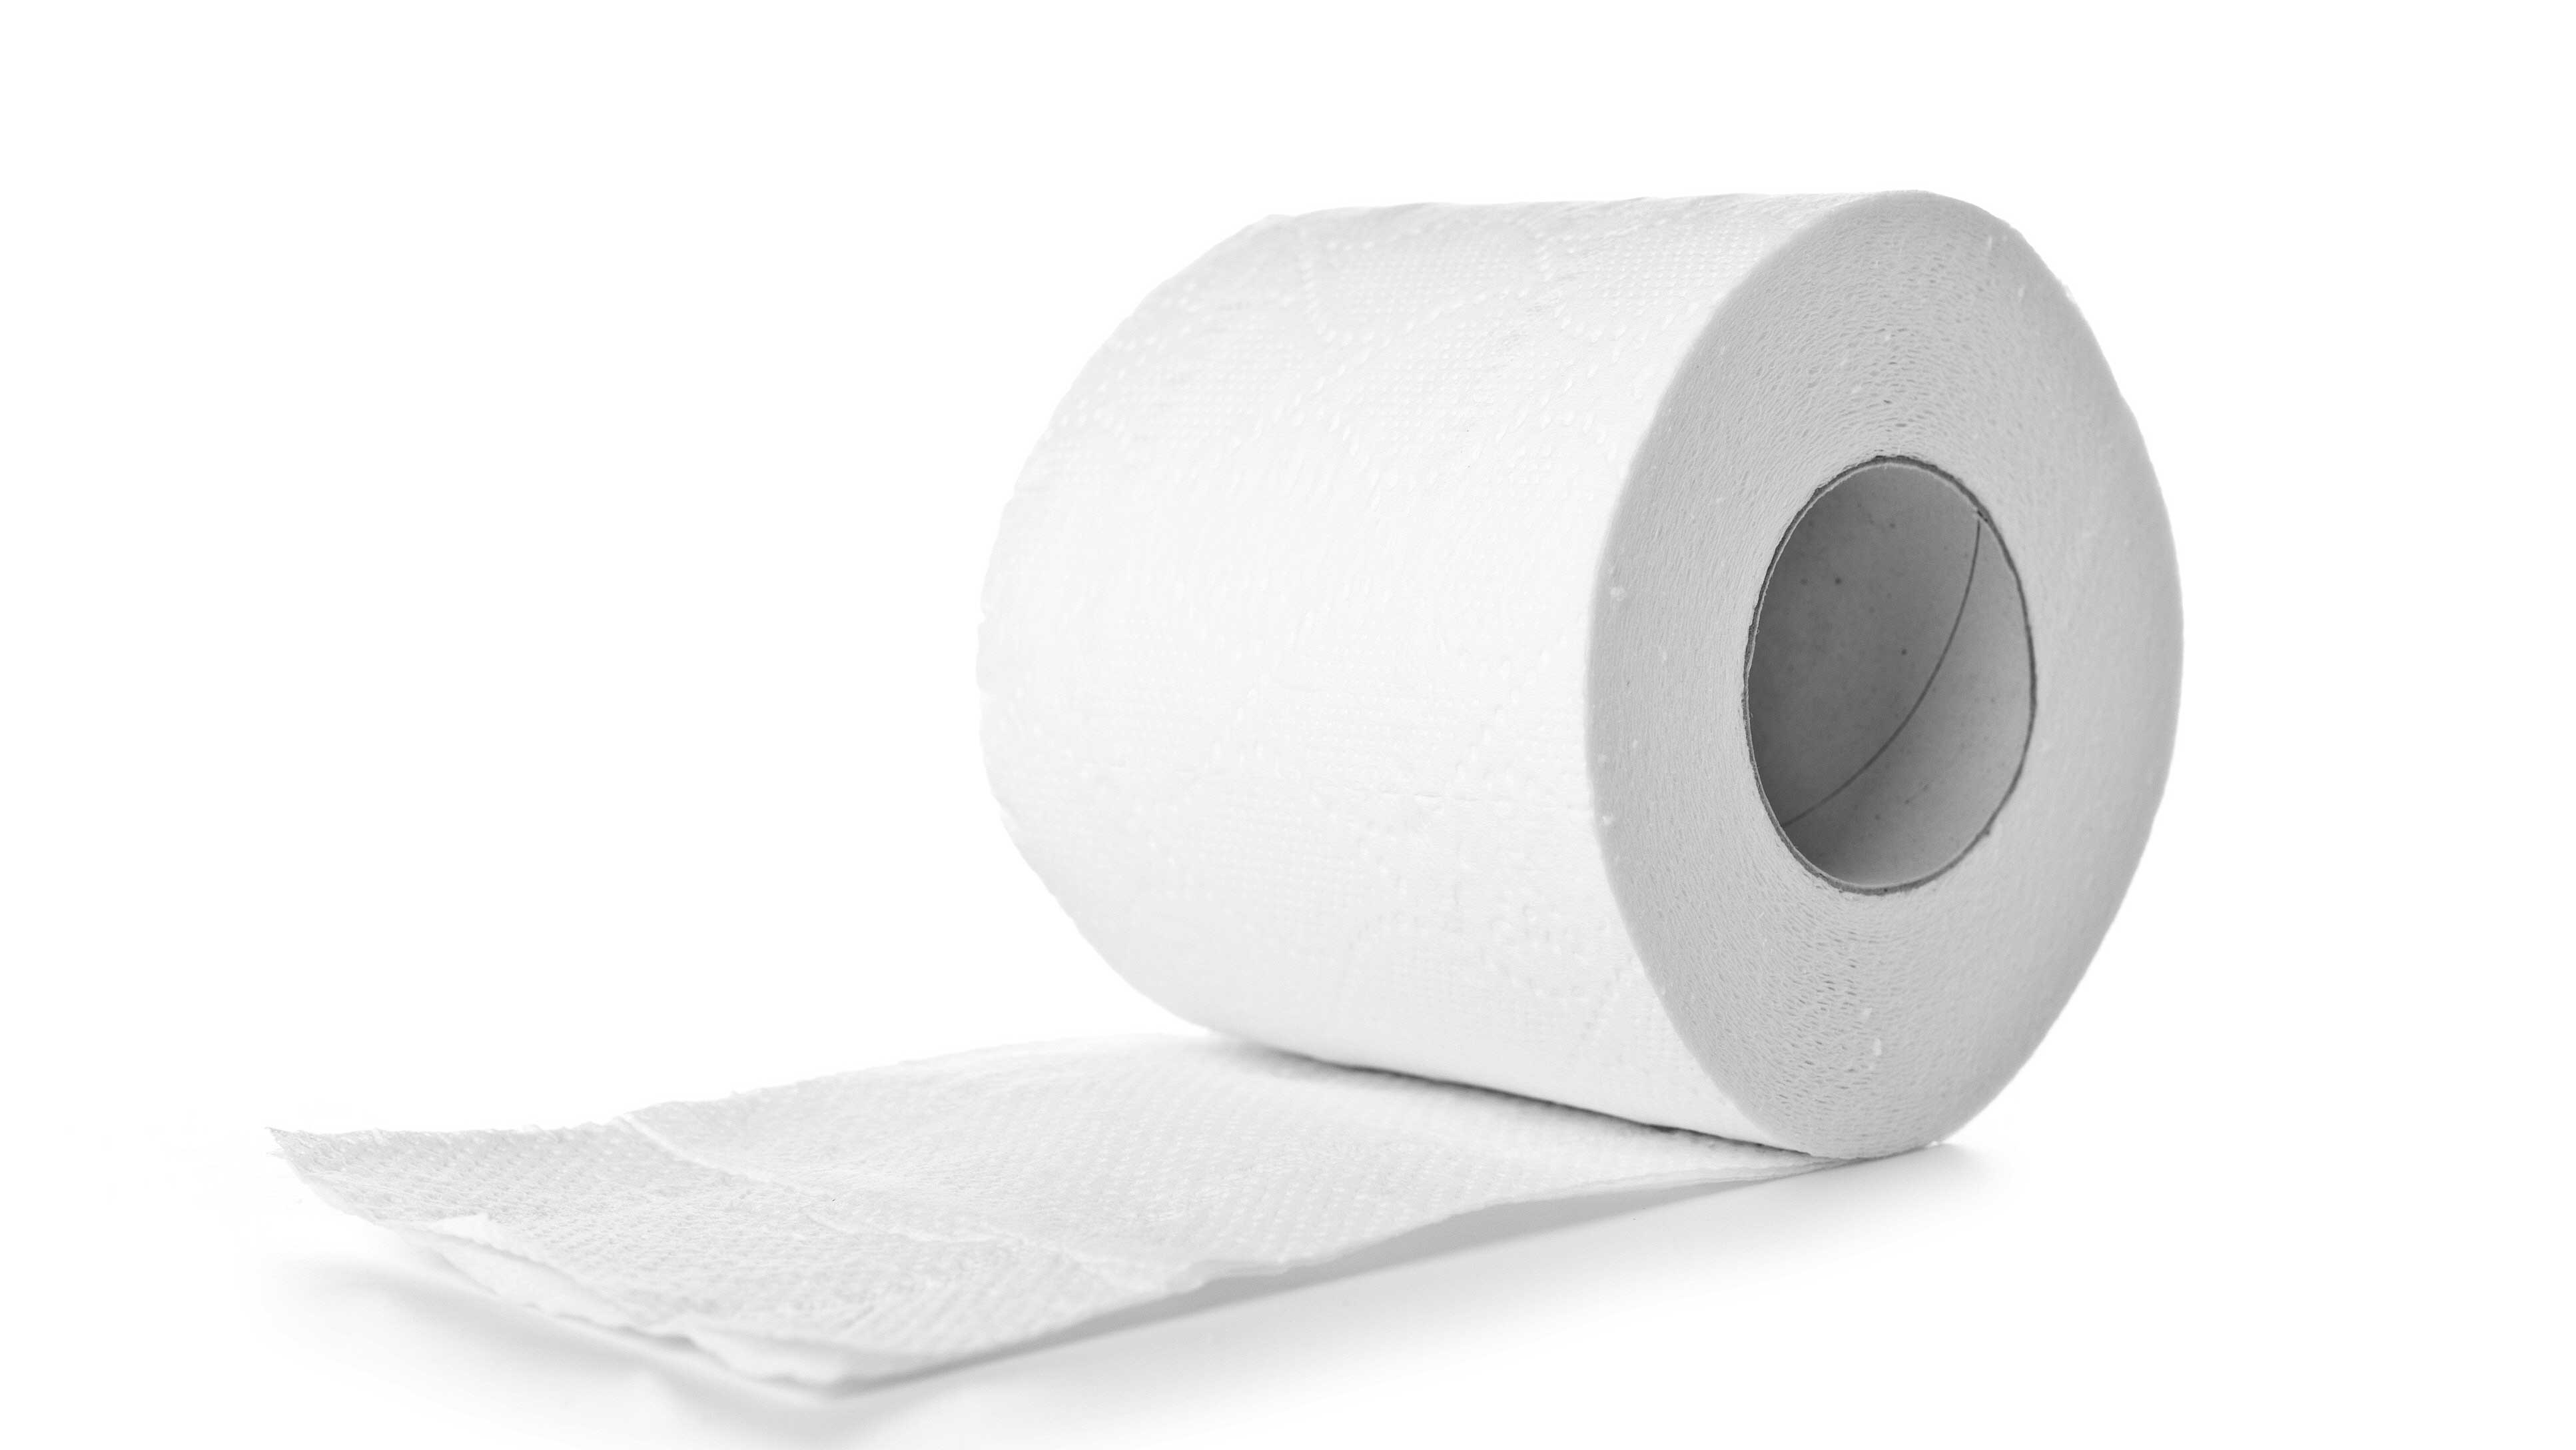 Changing the Toilet Paper Roll and Other Life Lessons